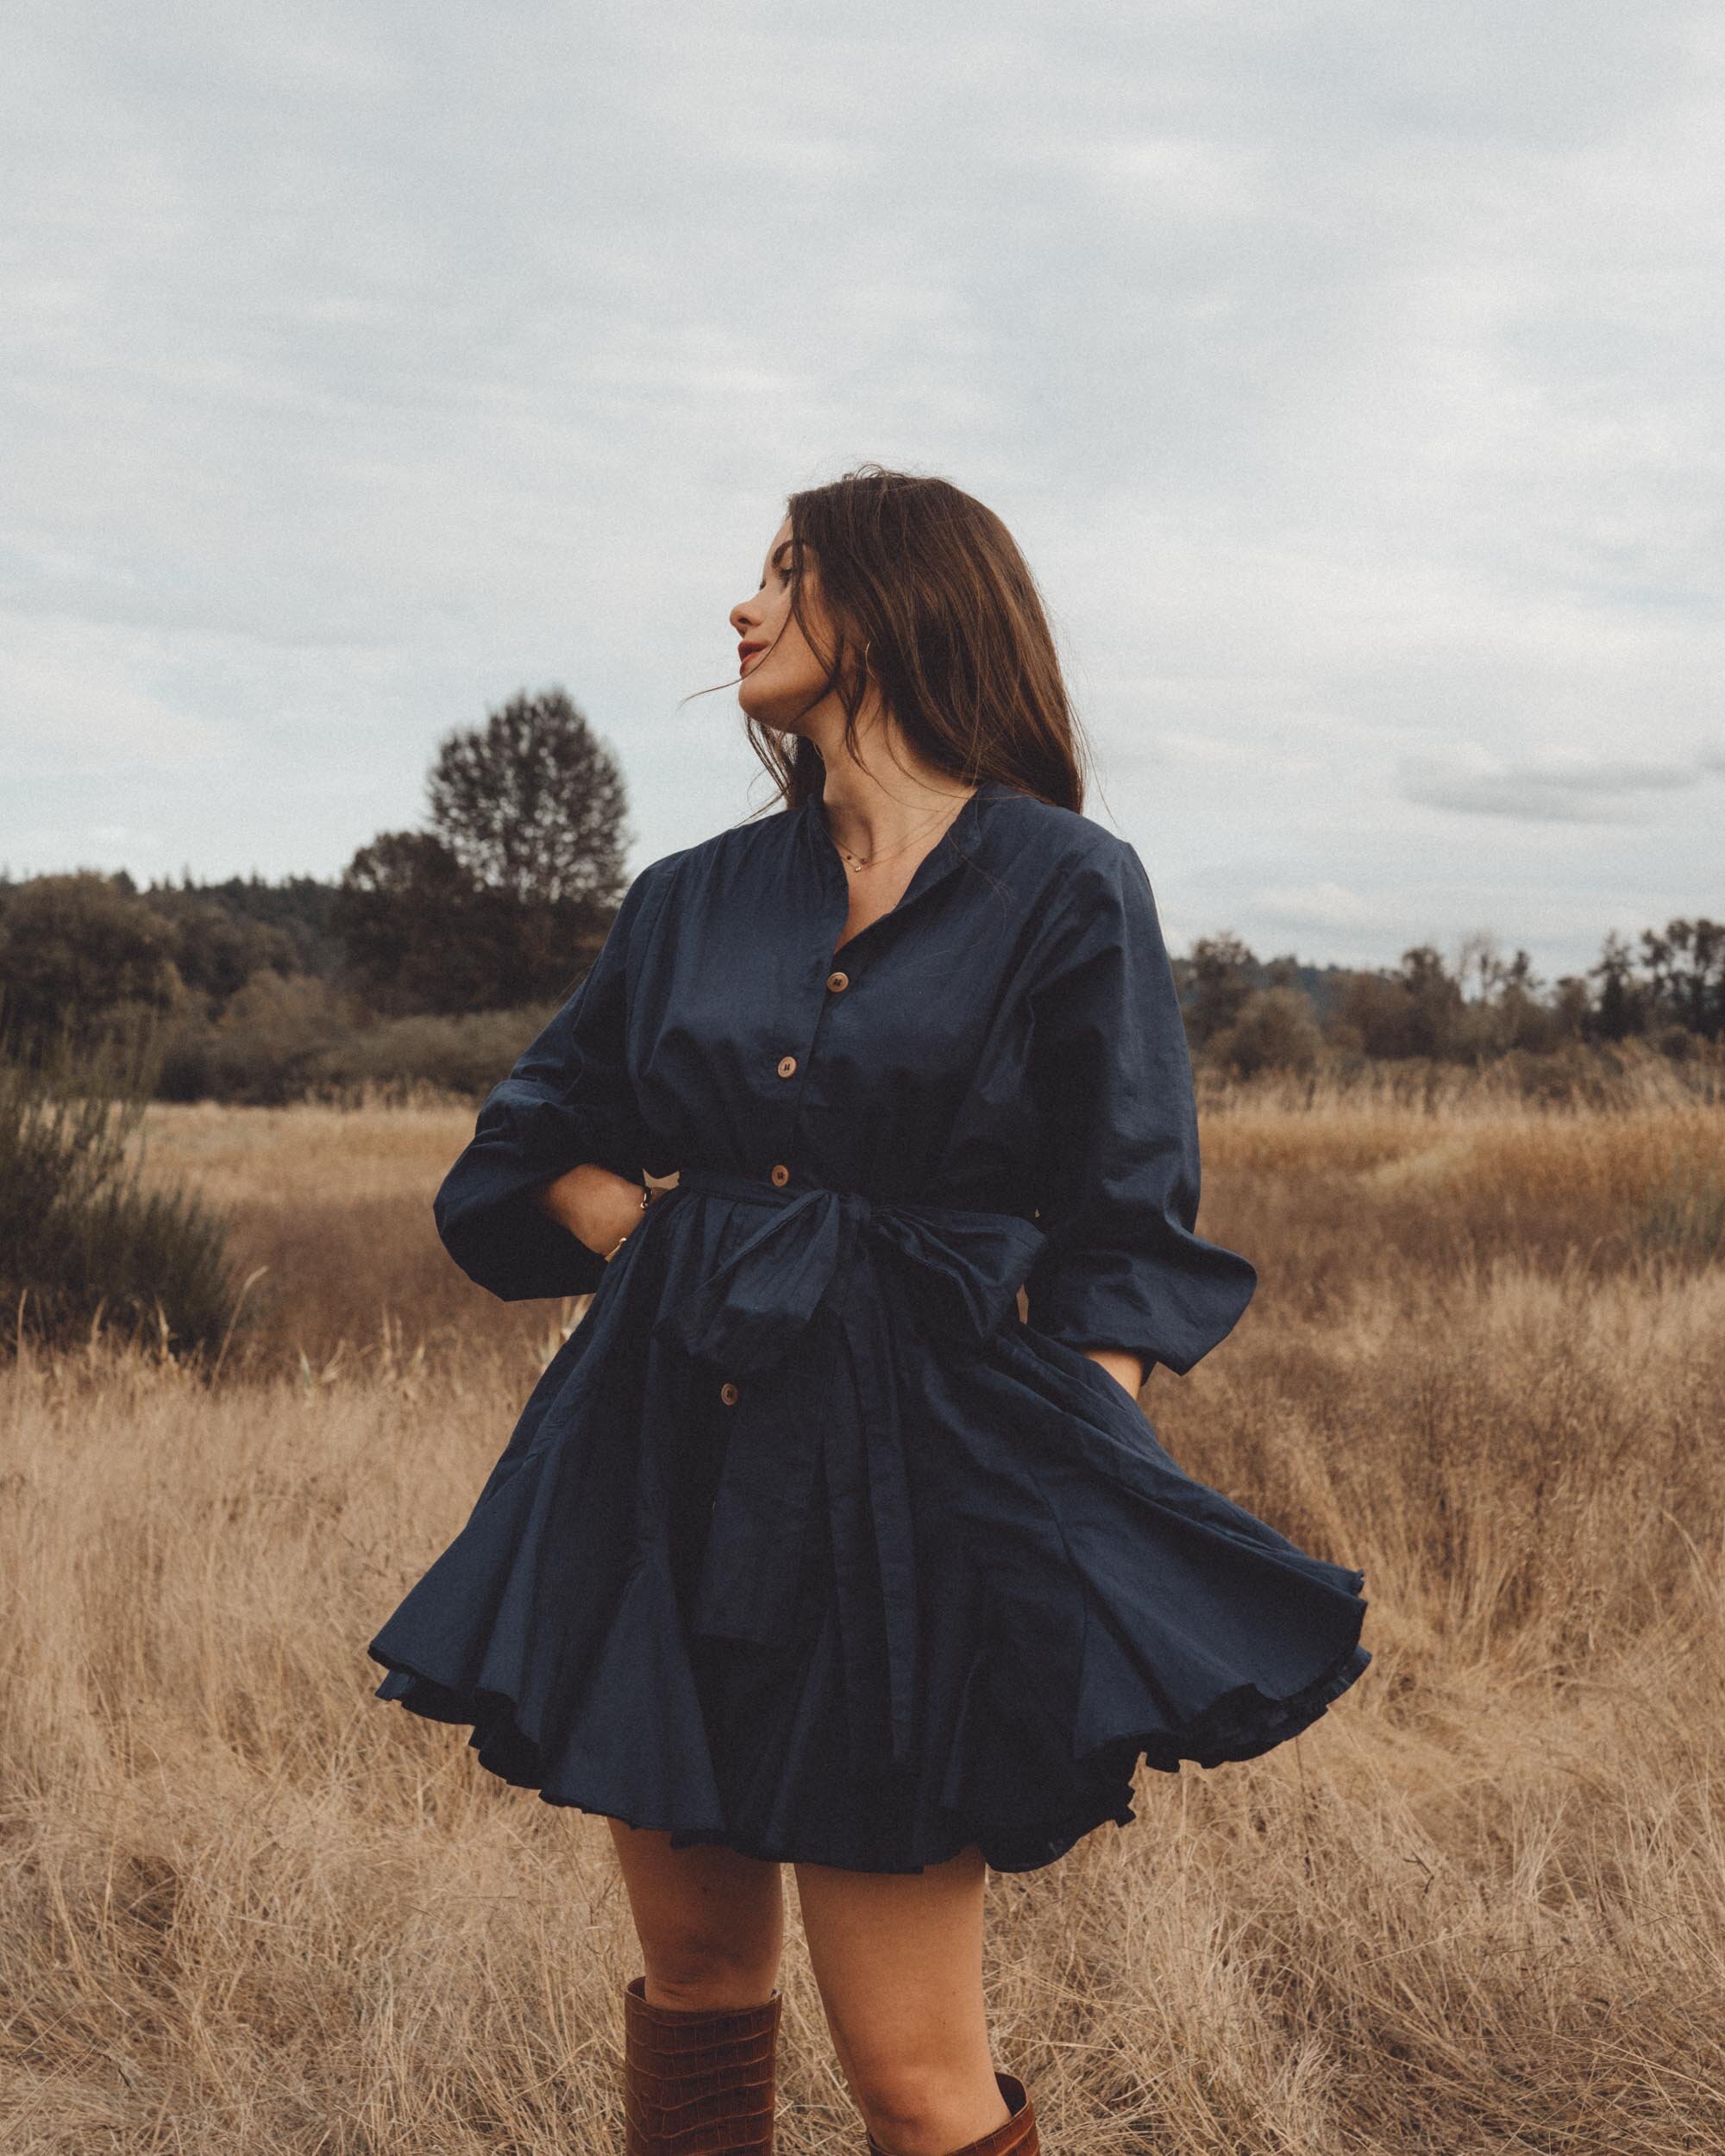 Chic Fall Dress Outfit. Sarah Butler of @sarahchristine wearing Rhode Emma Tie-Waist Flared Navy Dress and Brown Croc Knee High Boot in Seattle, Washington --9.jpg